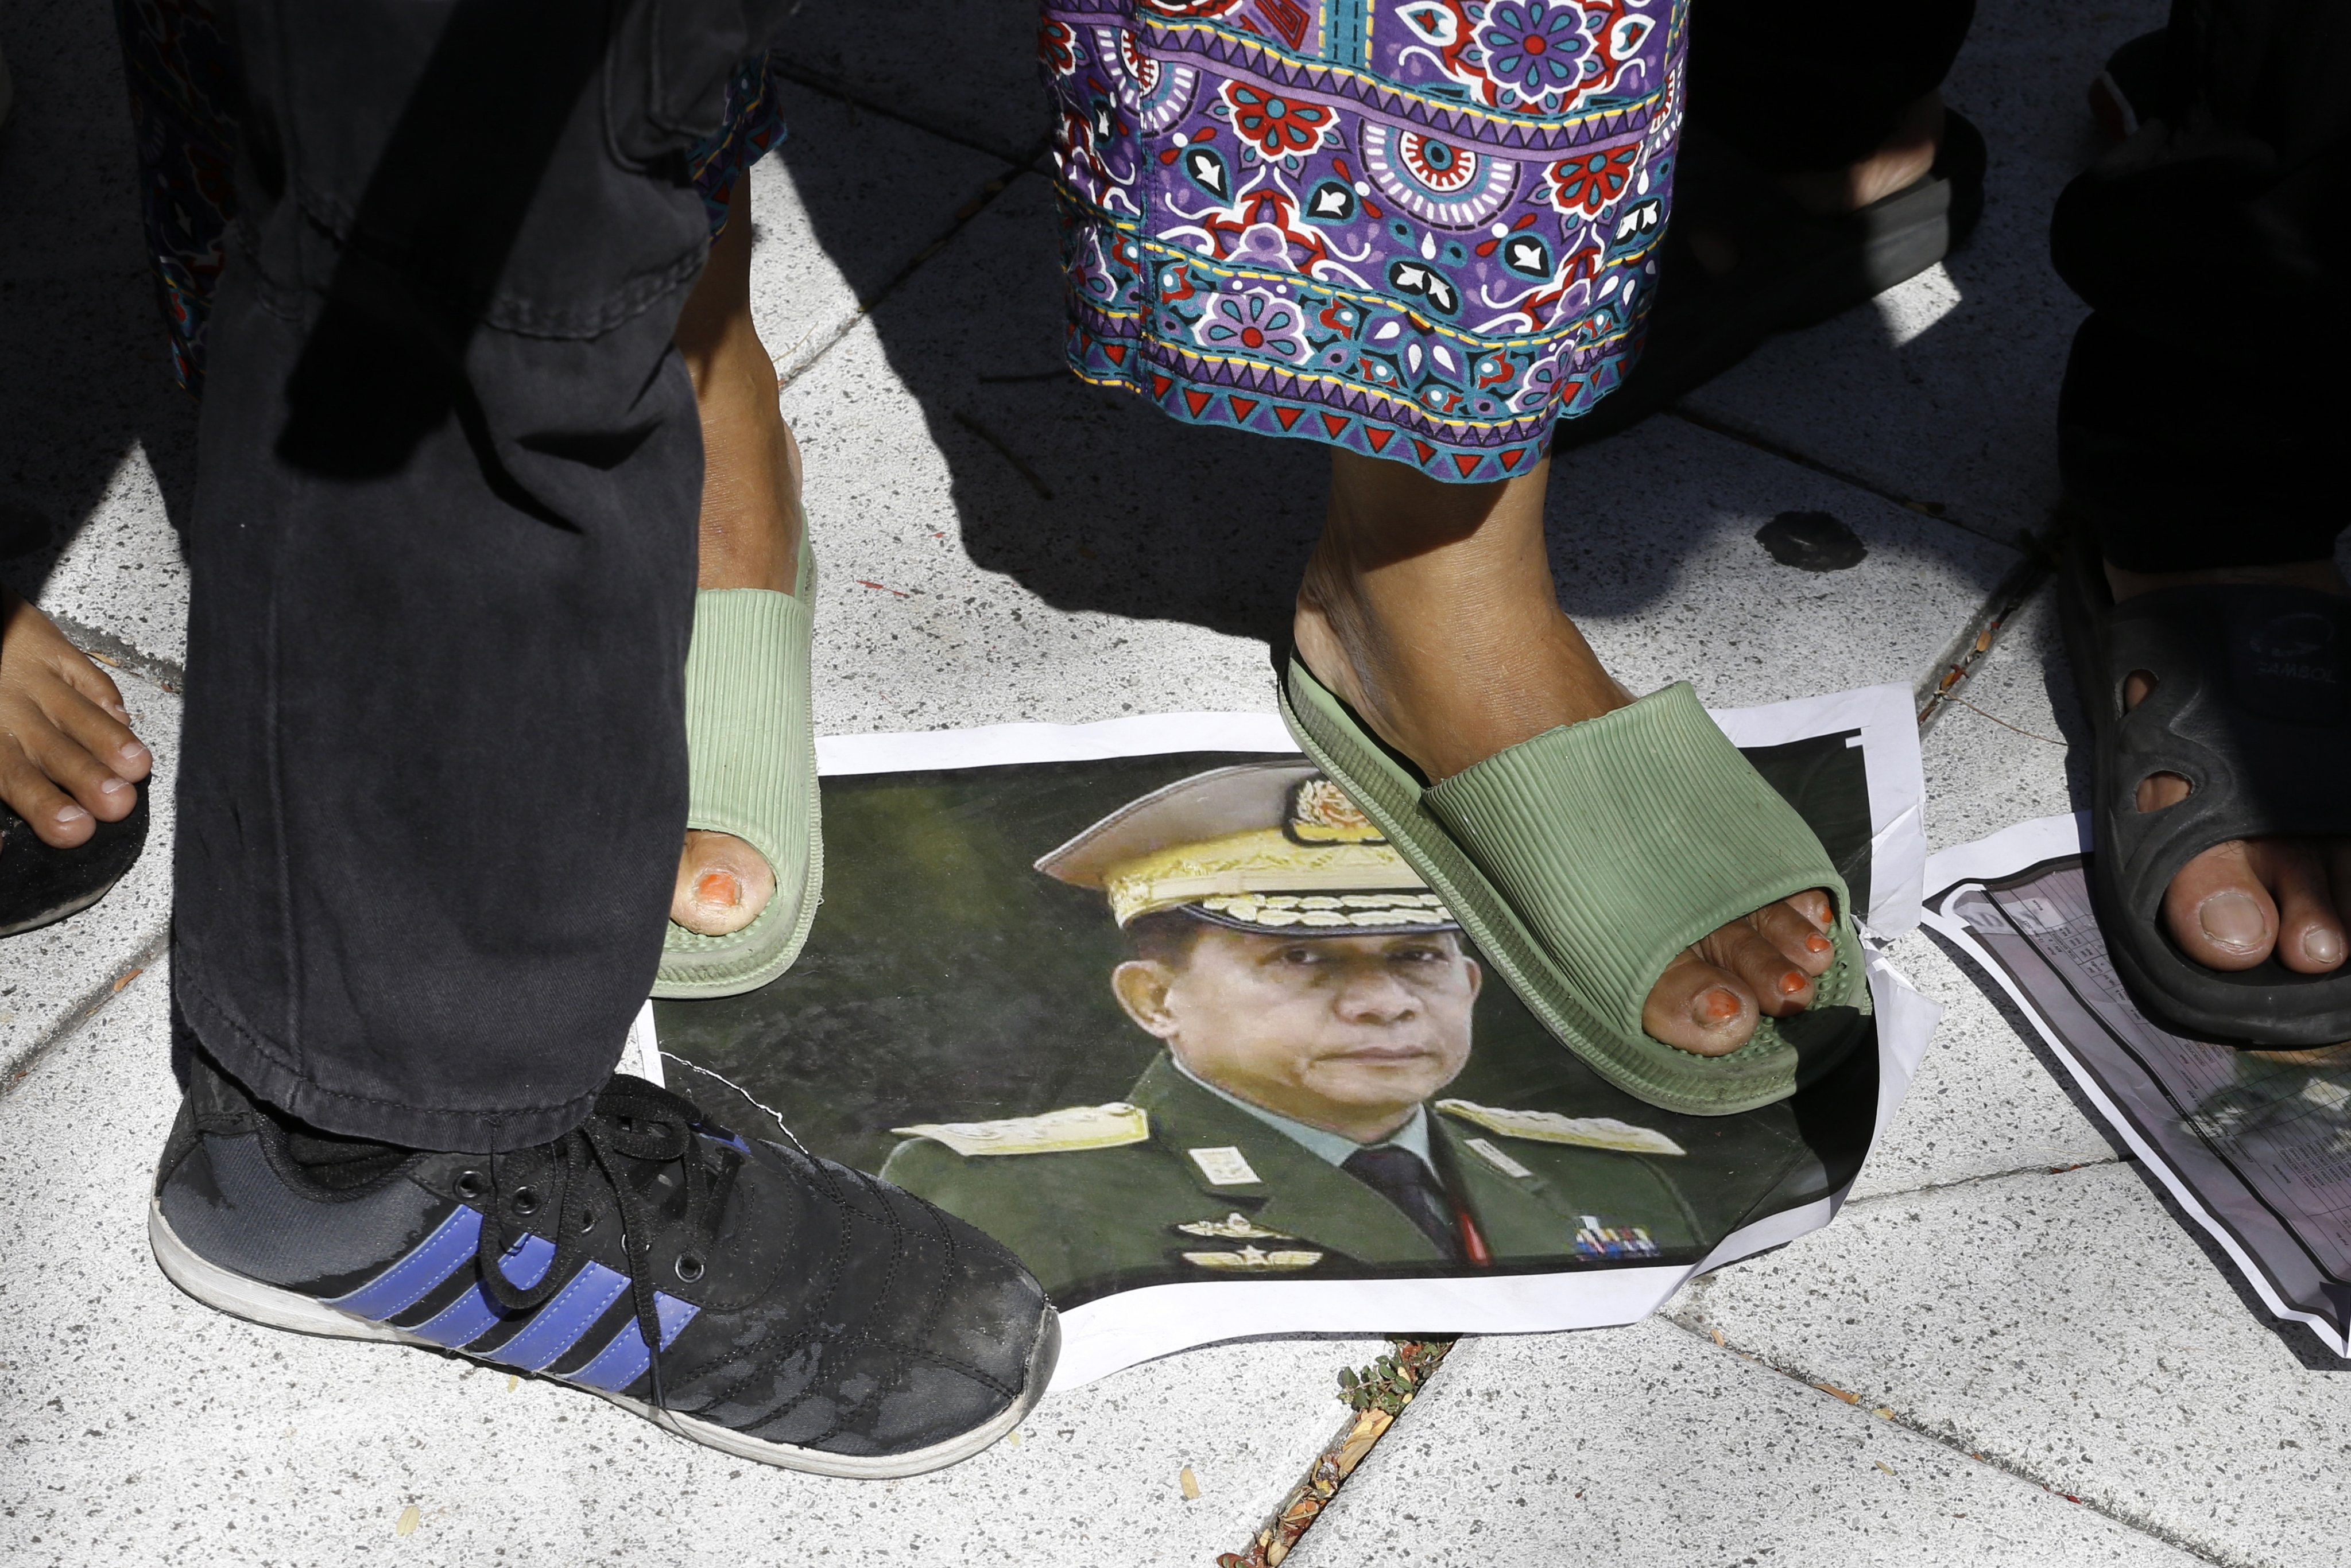 Myanmar migrant workers in Thailand step on a picture of junta chief General Min Aung Hlaing at a rally in Bangkok on Sunday. Photo: EPA-EFE